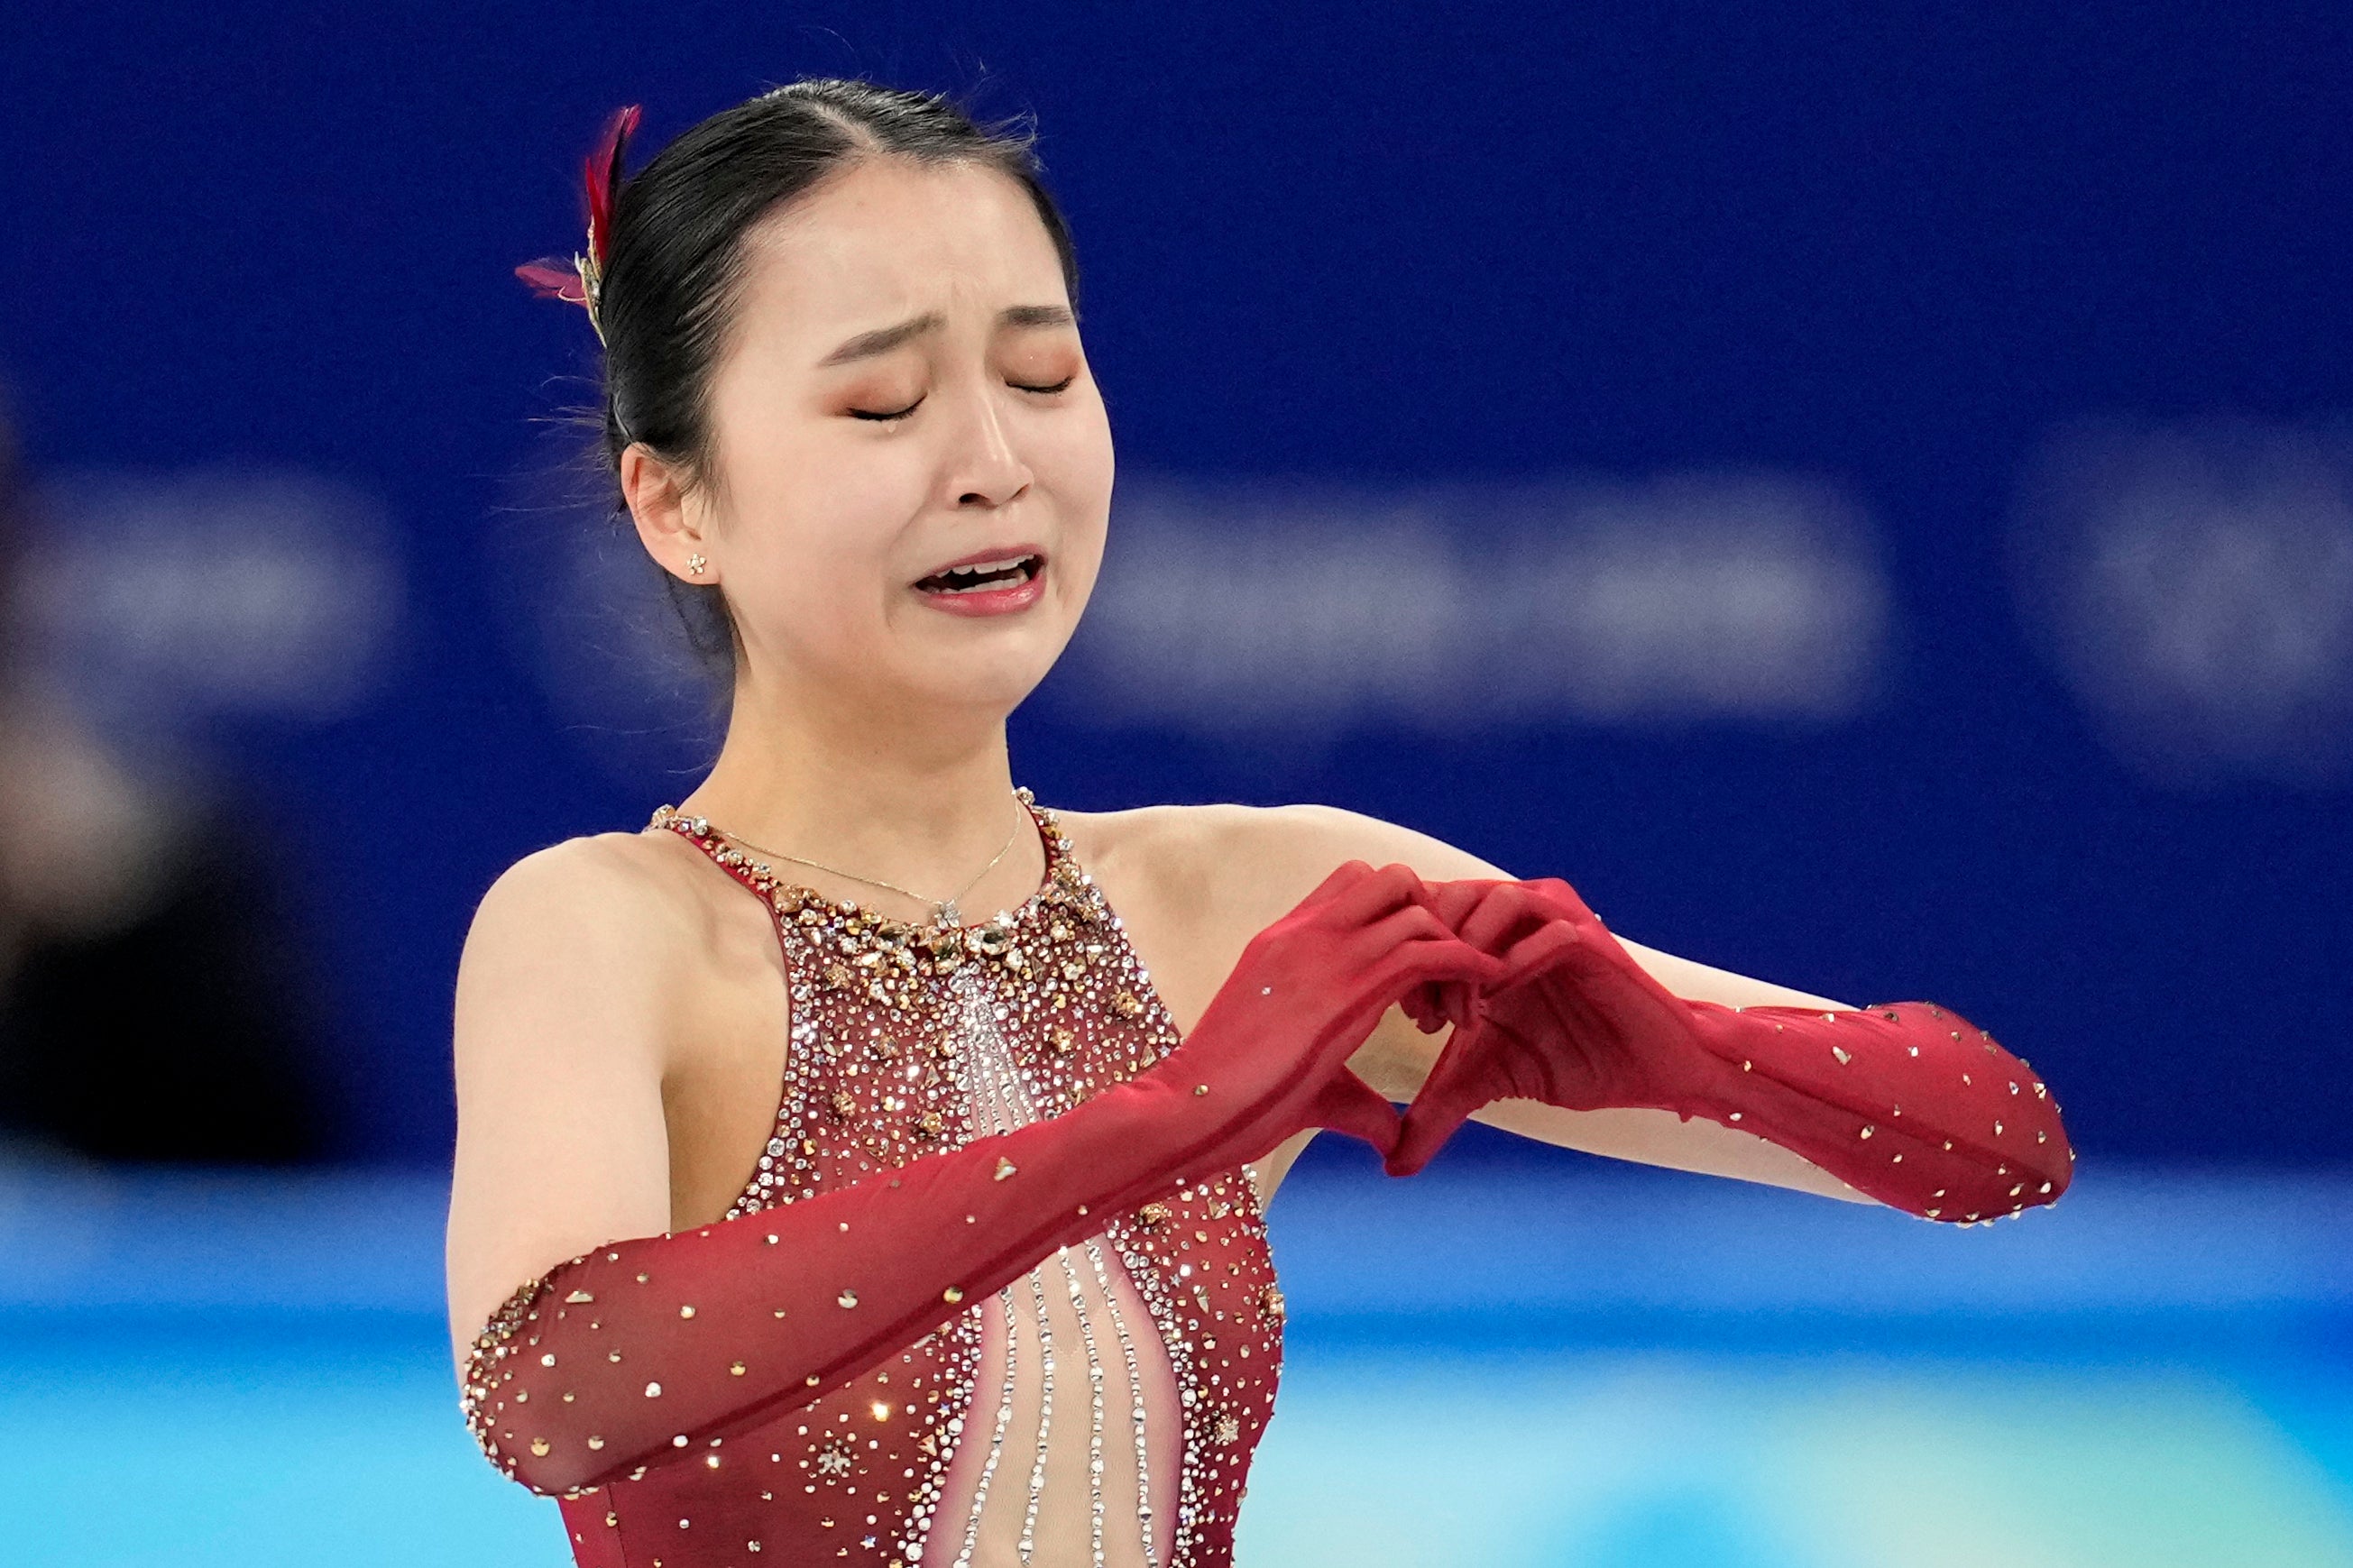 China’s Zhu Yi reacts after the women’s team free skate programme during the figure skating competition at the 2022 Winter Olympics on Monday in Beijing